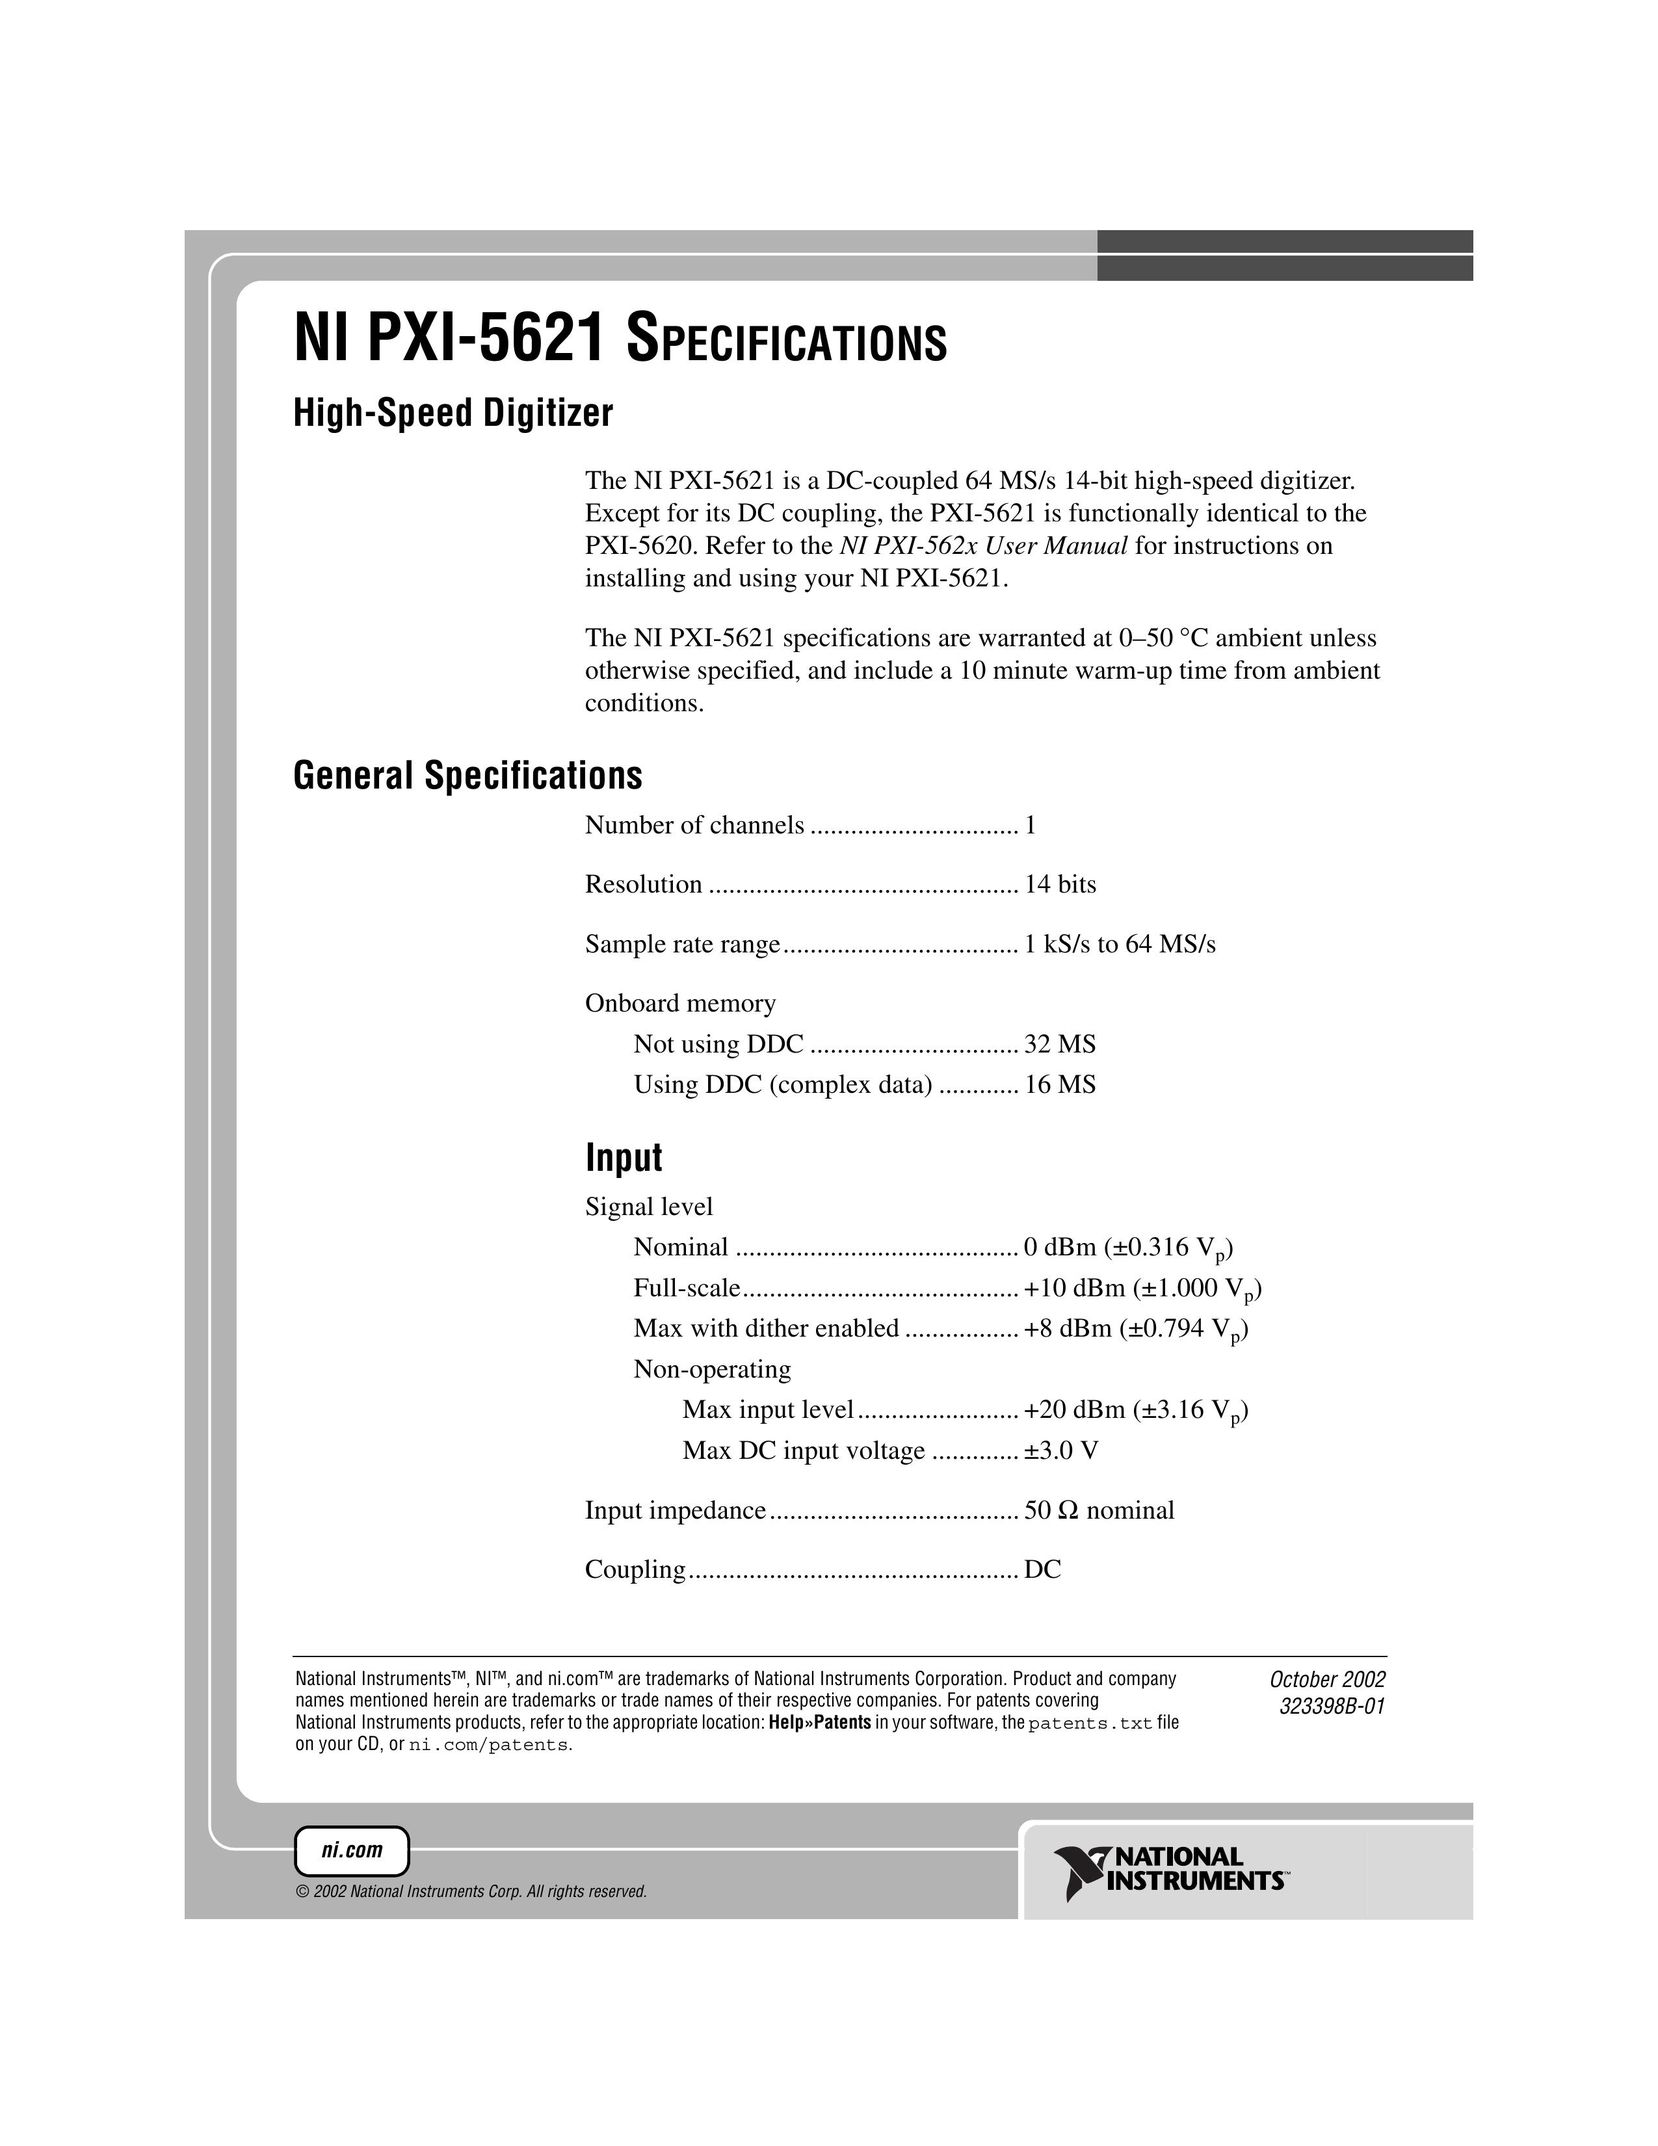 National Instruments NI PXI-5621 Graphics Tablet User Manual